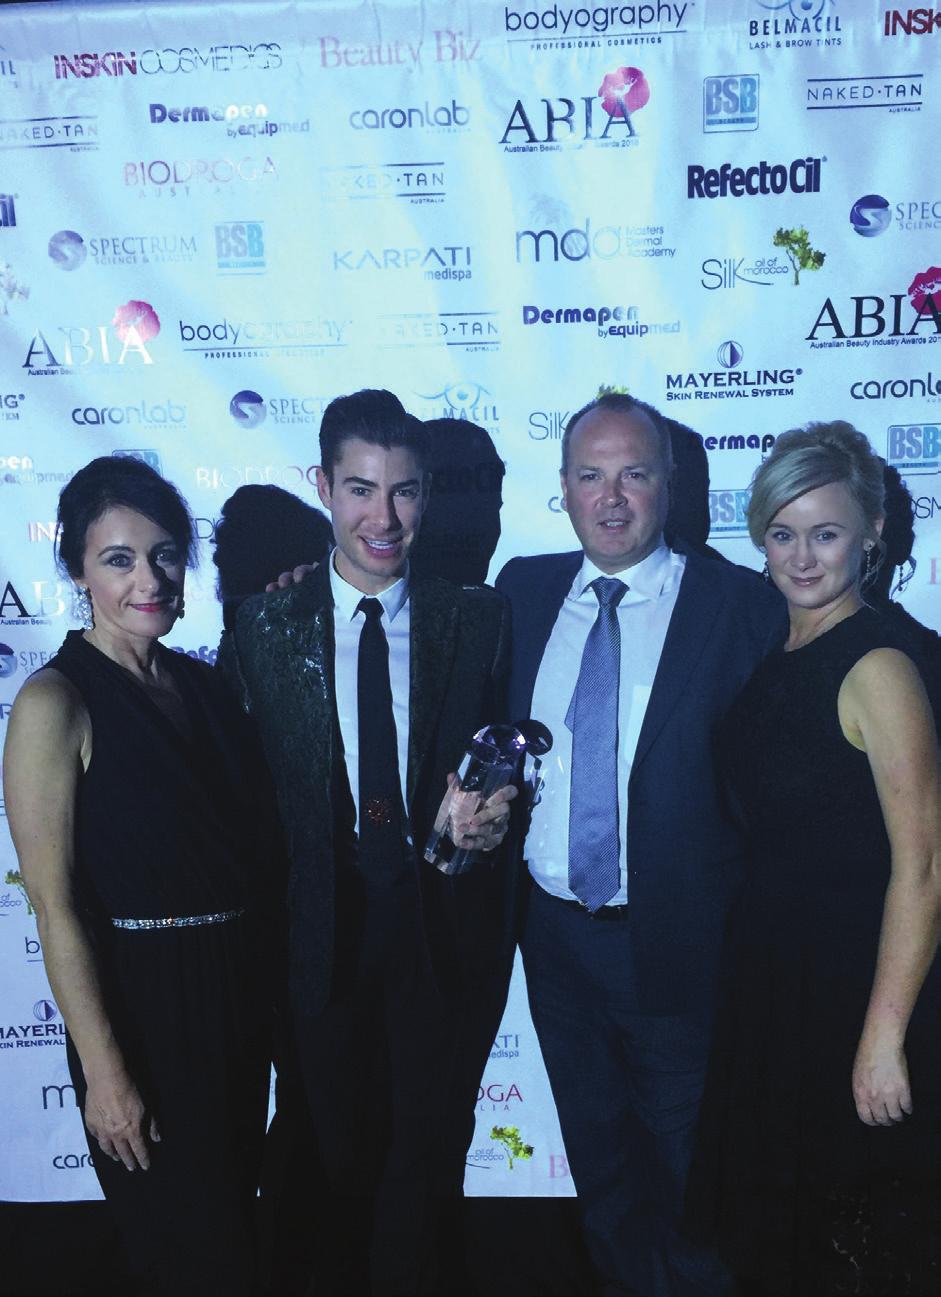 ABIA WINNER AS BEST EDUCATOR OF THE YEAR ABIA Australian Beauty Industry Awards 2016 ««WINNER August 2016 Andrew Christie DermapenWorld Global Medical Trainer and Clinical Director was awarded the